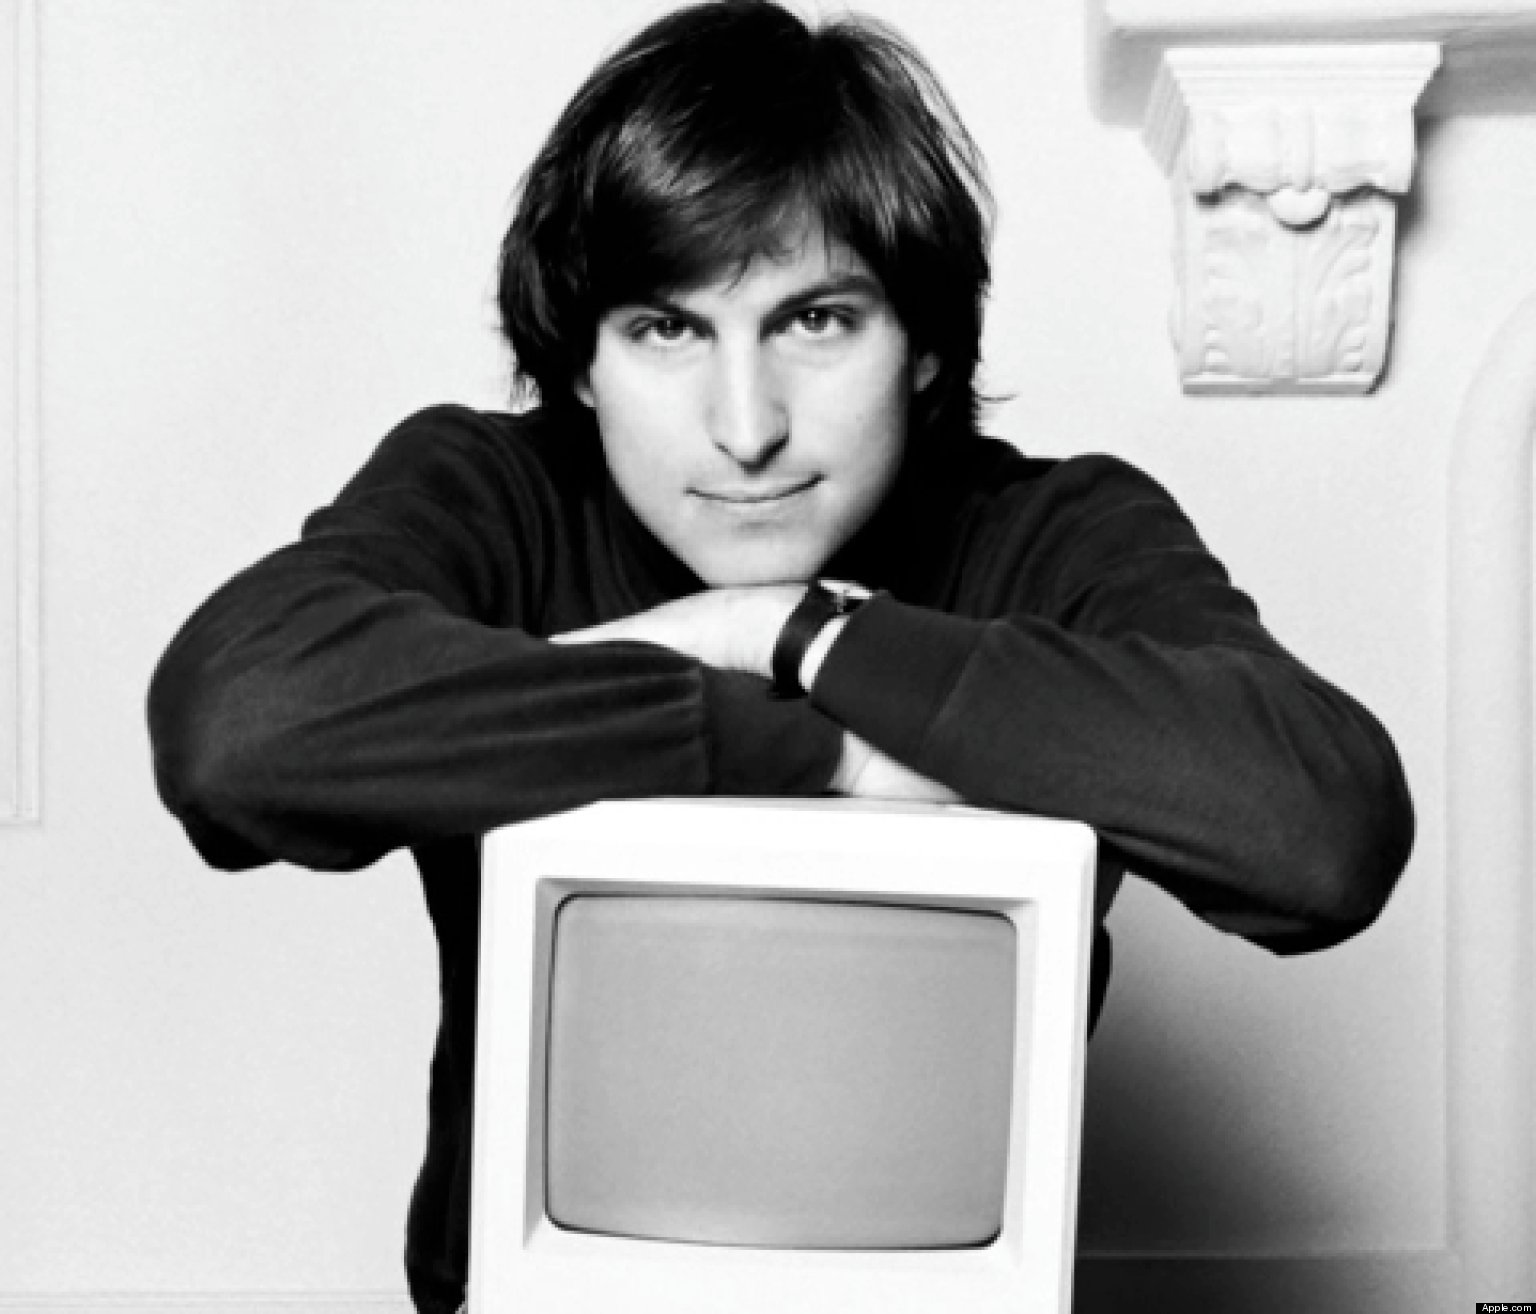 Untold Stories About Steve Jobs: Friends and Colleagues Share Their Memories